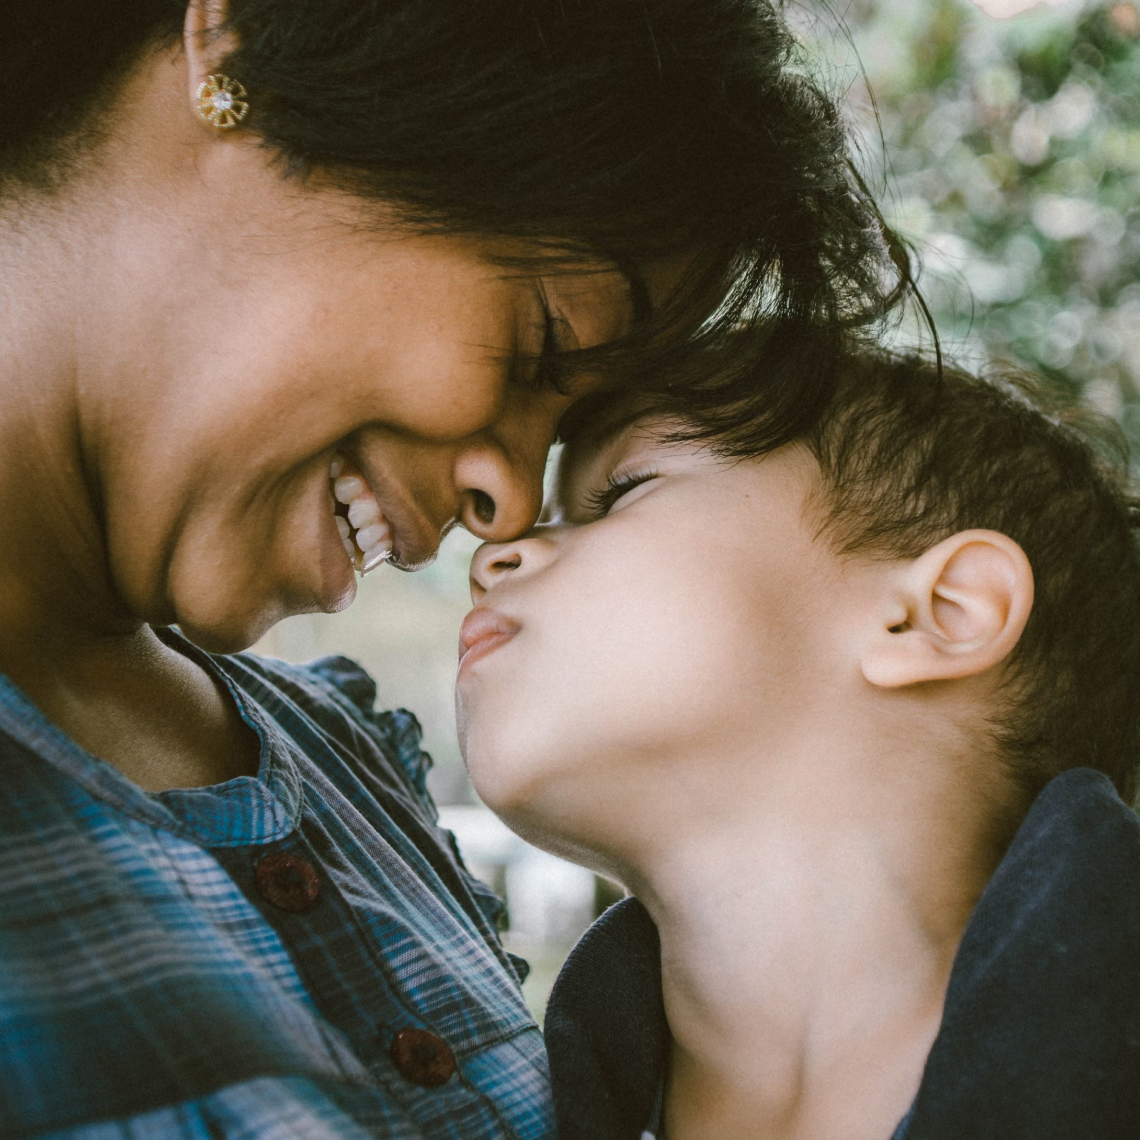 Photo of a Mother and Son smiling at each other, by Bruno Nascimento, Unsplash